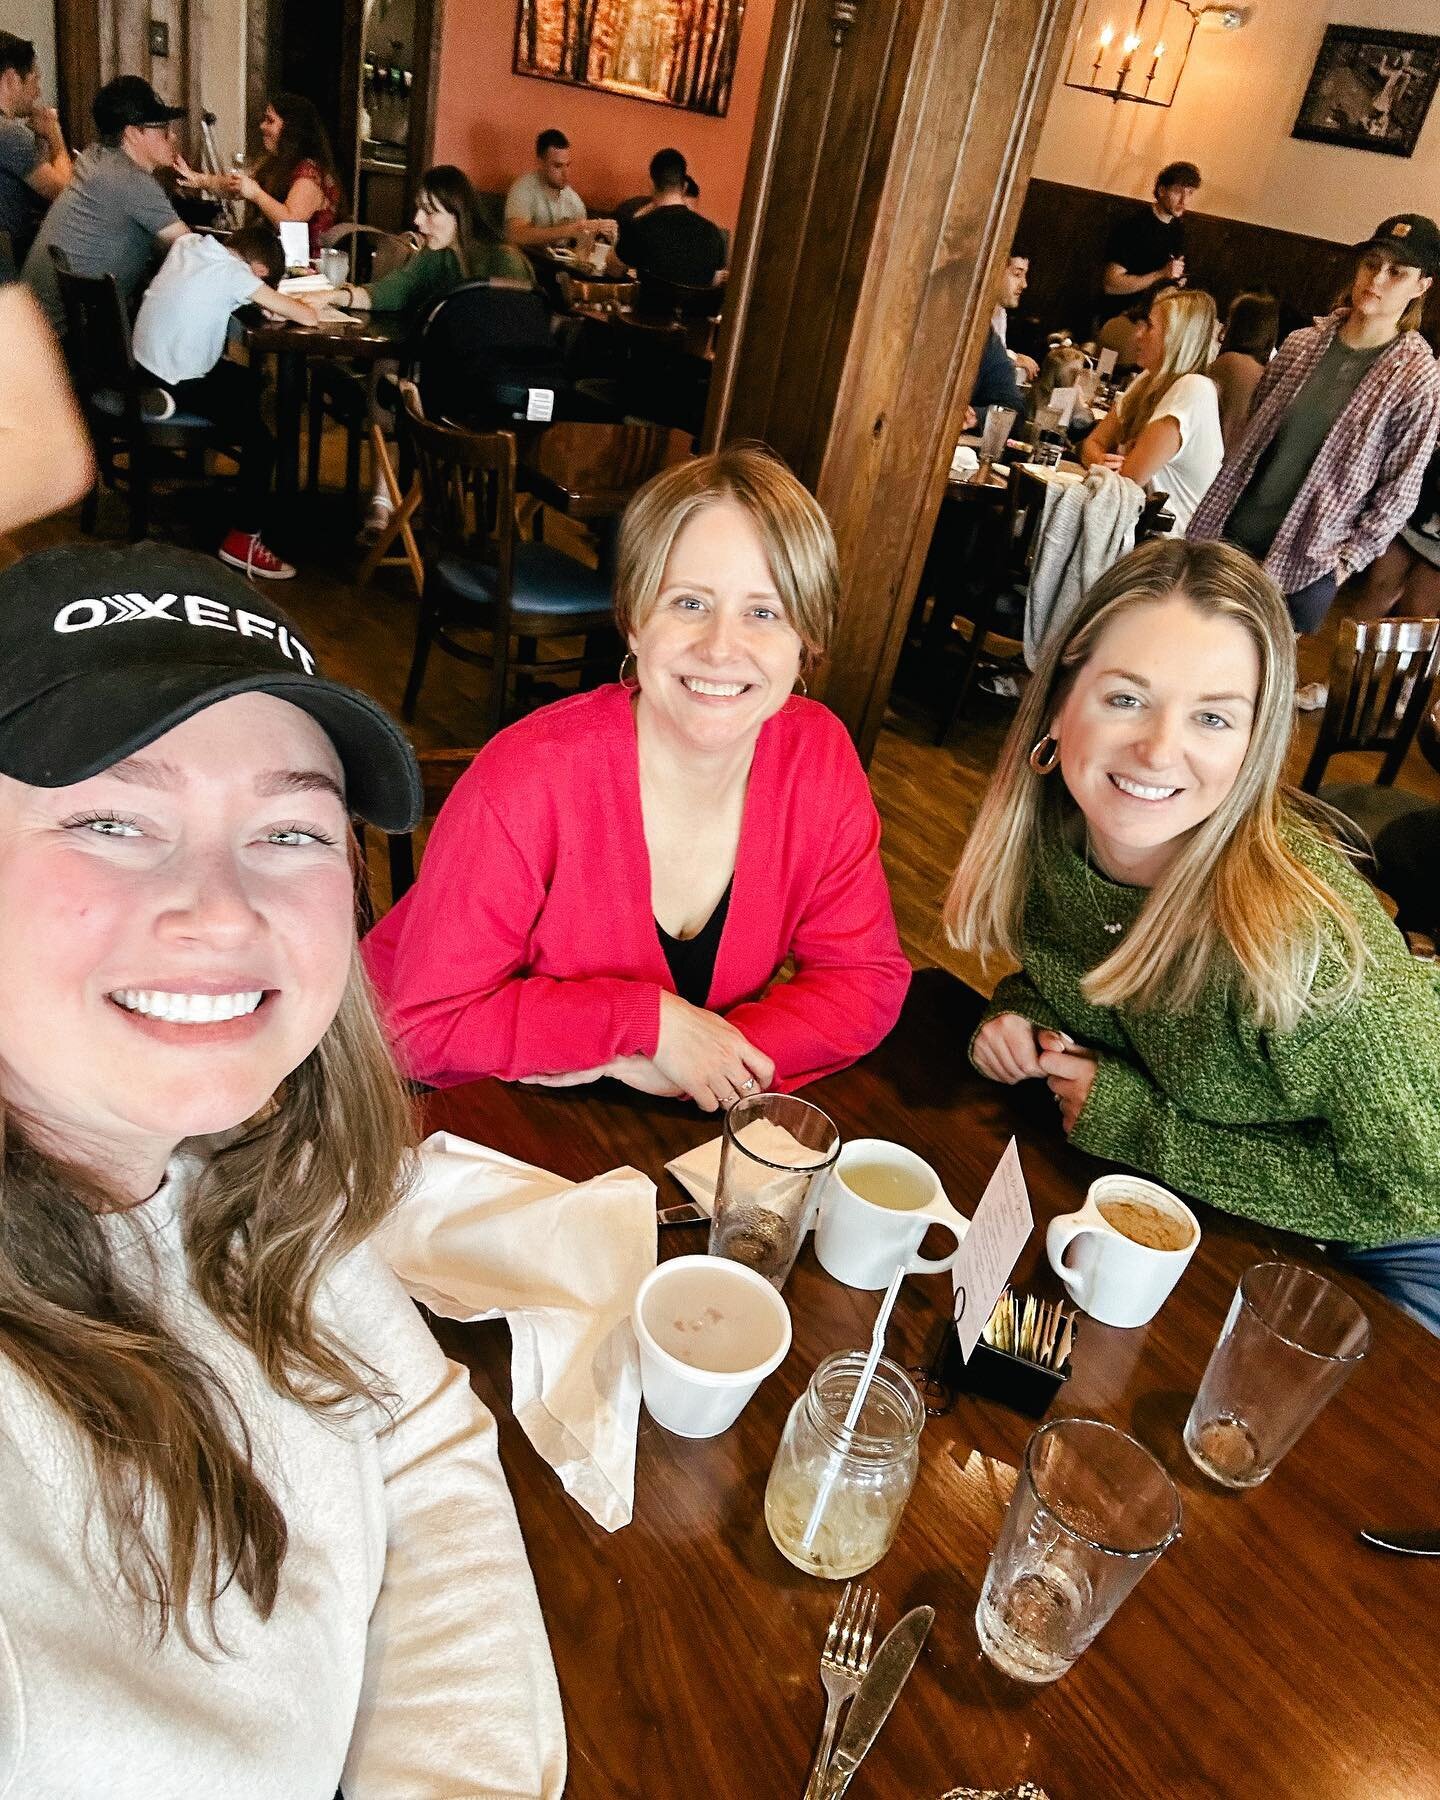 Had the best warrior brunch this morning with some of our amazing local members. We love these ladies so much! 🤍

@our.ivf.world @lindsey.torgersen @wewantababymc